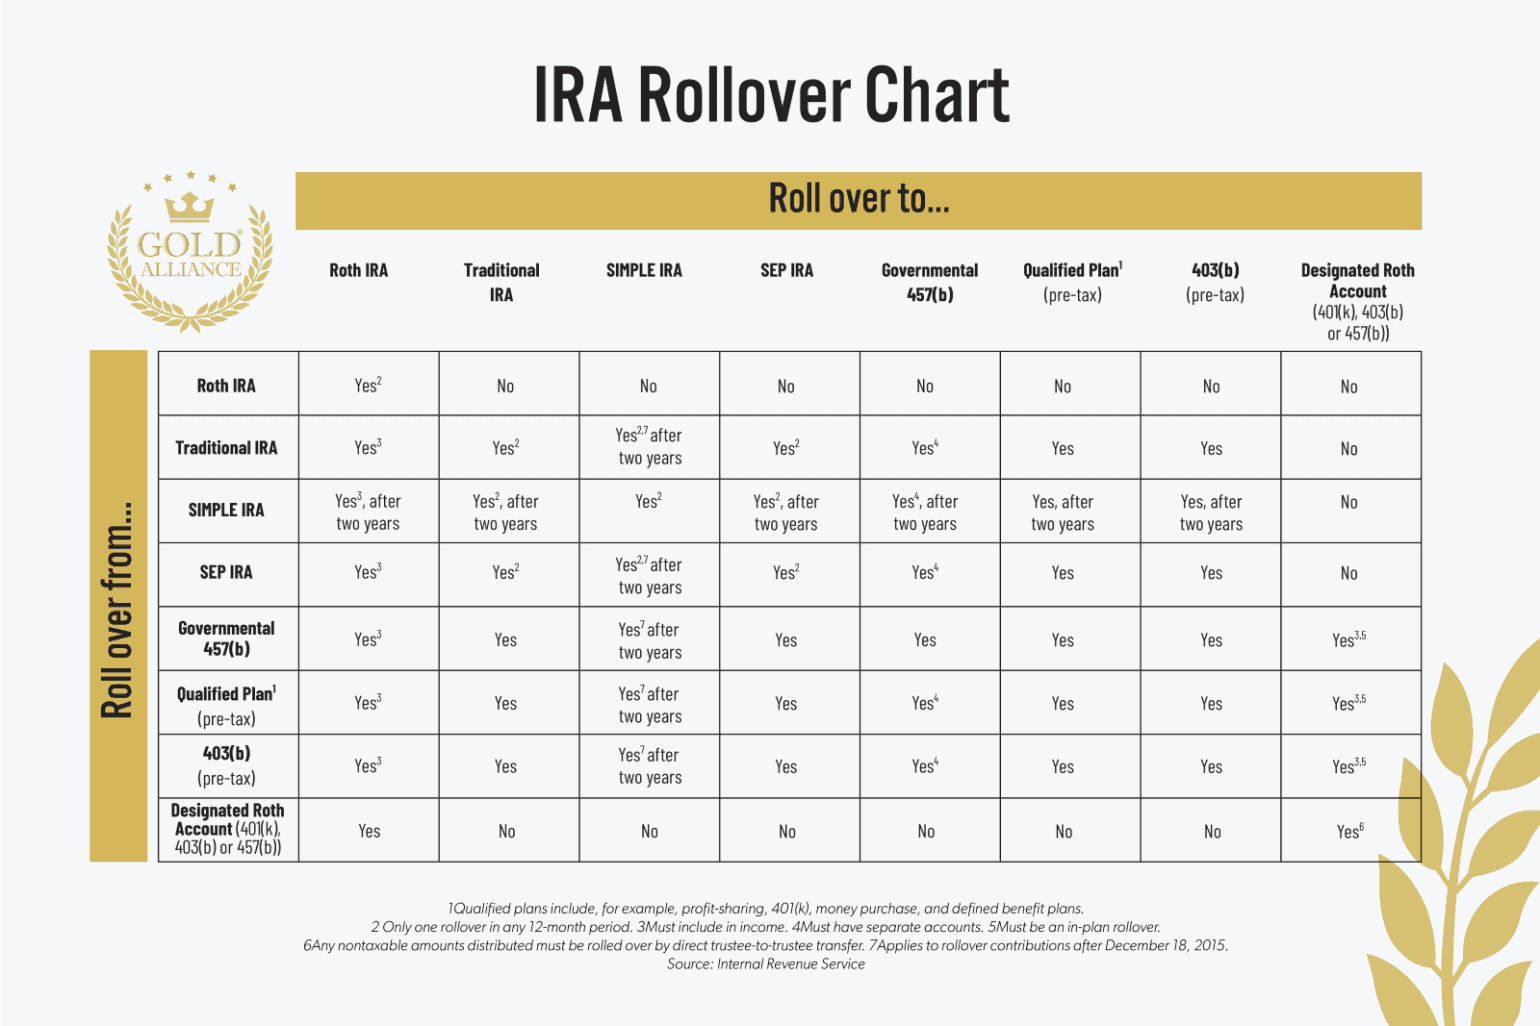 IRA Rollover Chart: Where Can You Roll Over Your Retirement Account ...